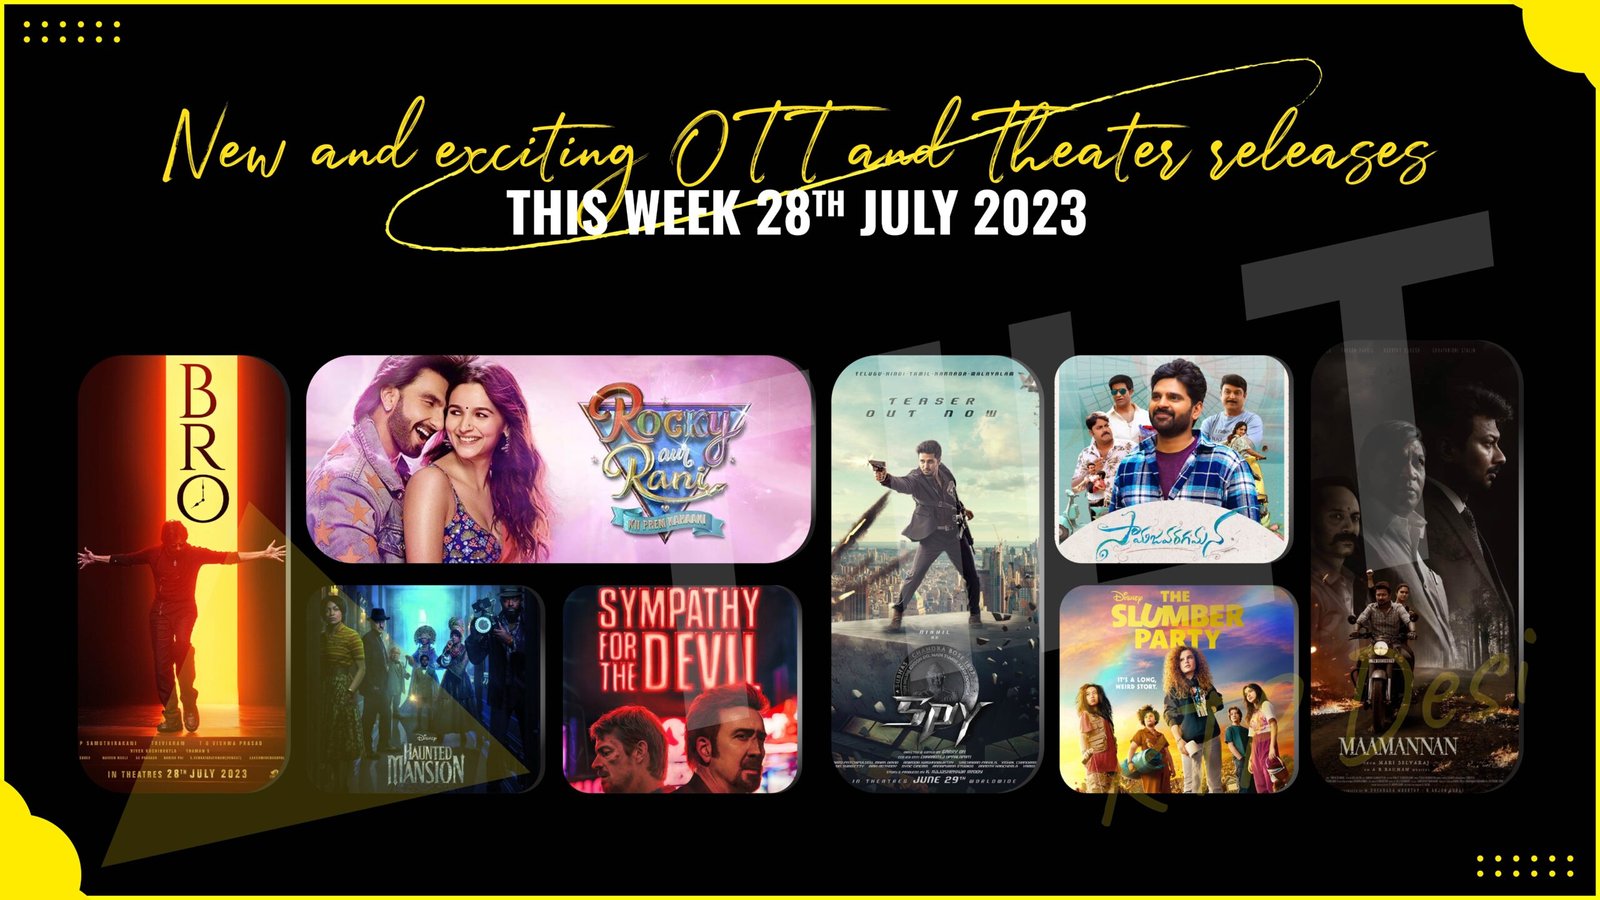 New Theatre and OTT releases this week 28th July 2023 -Triangle tilt